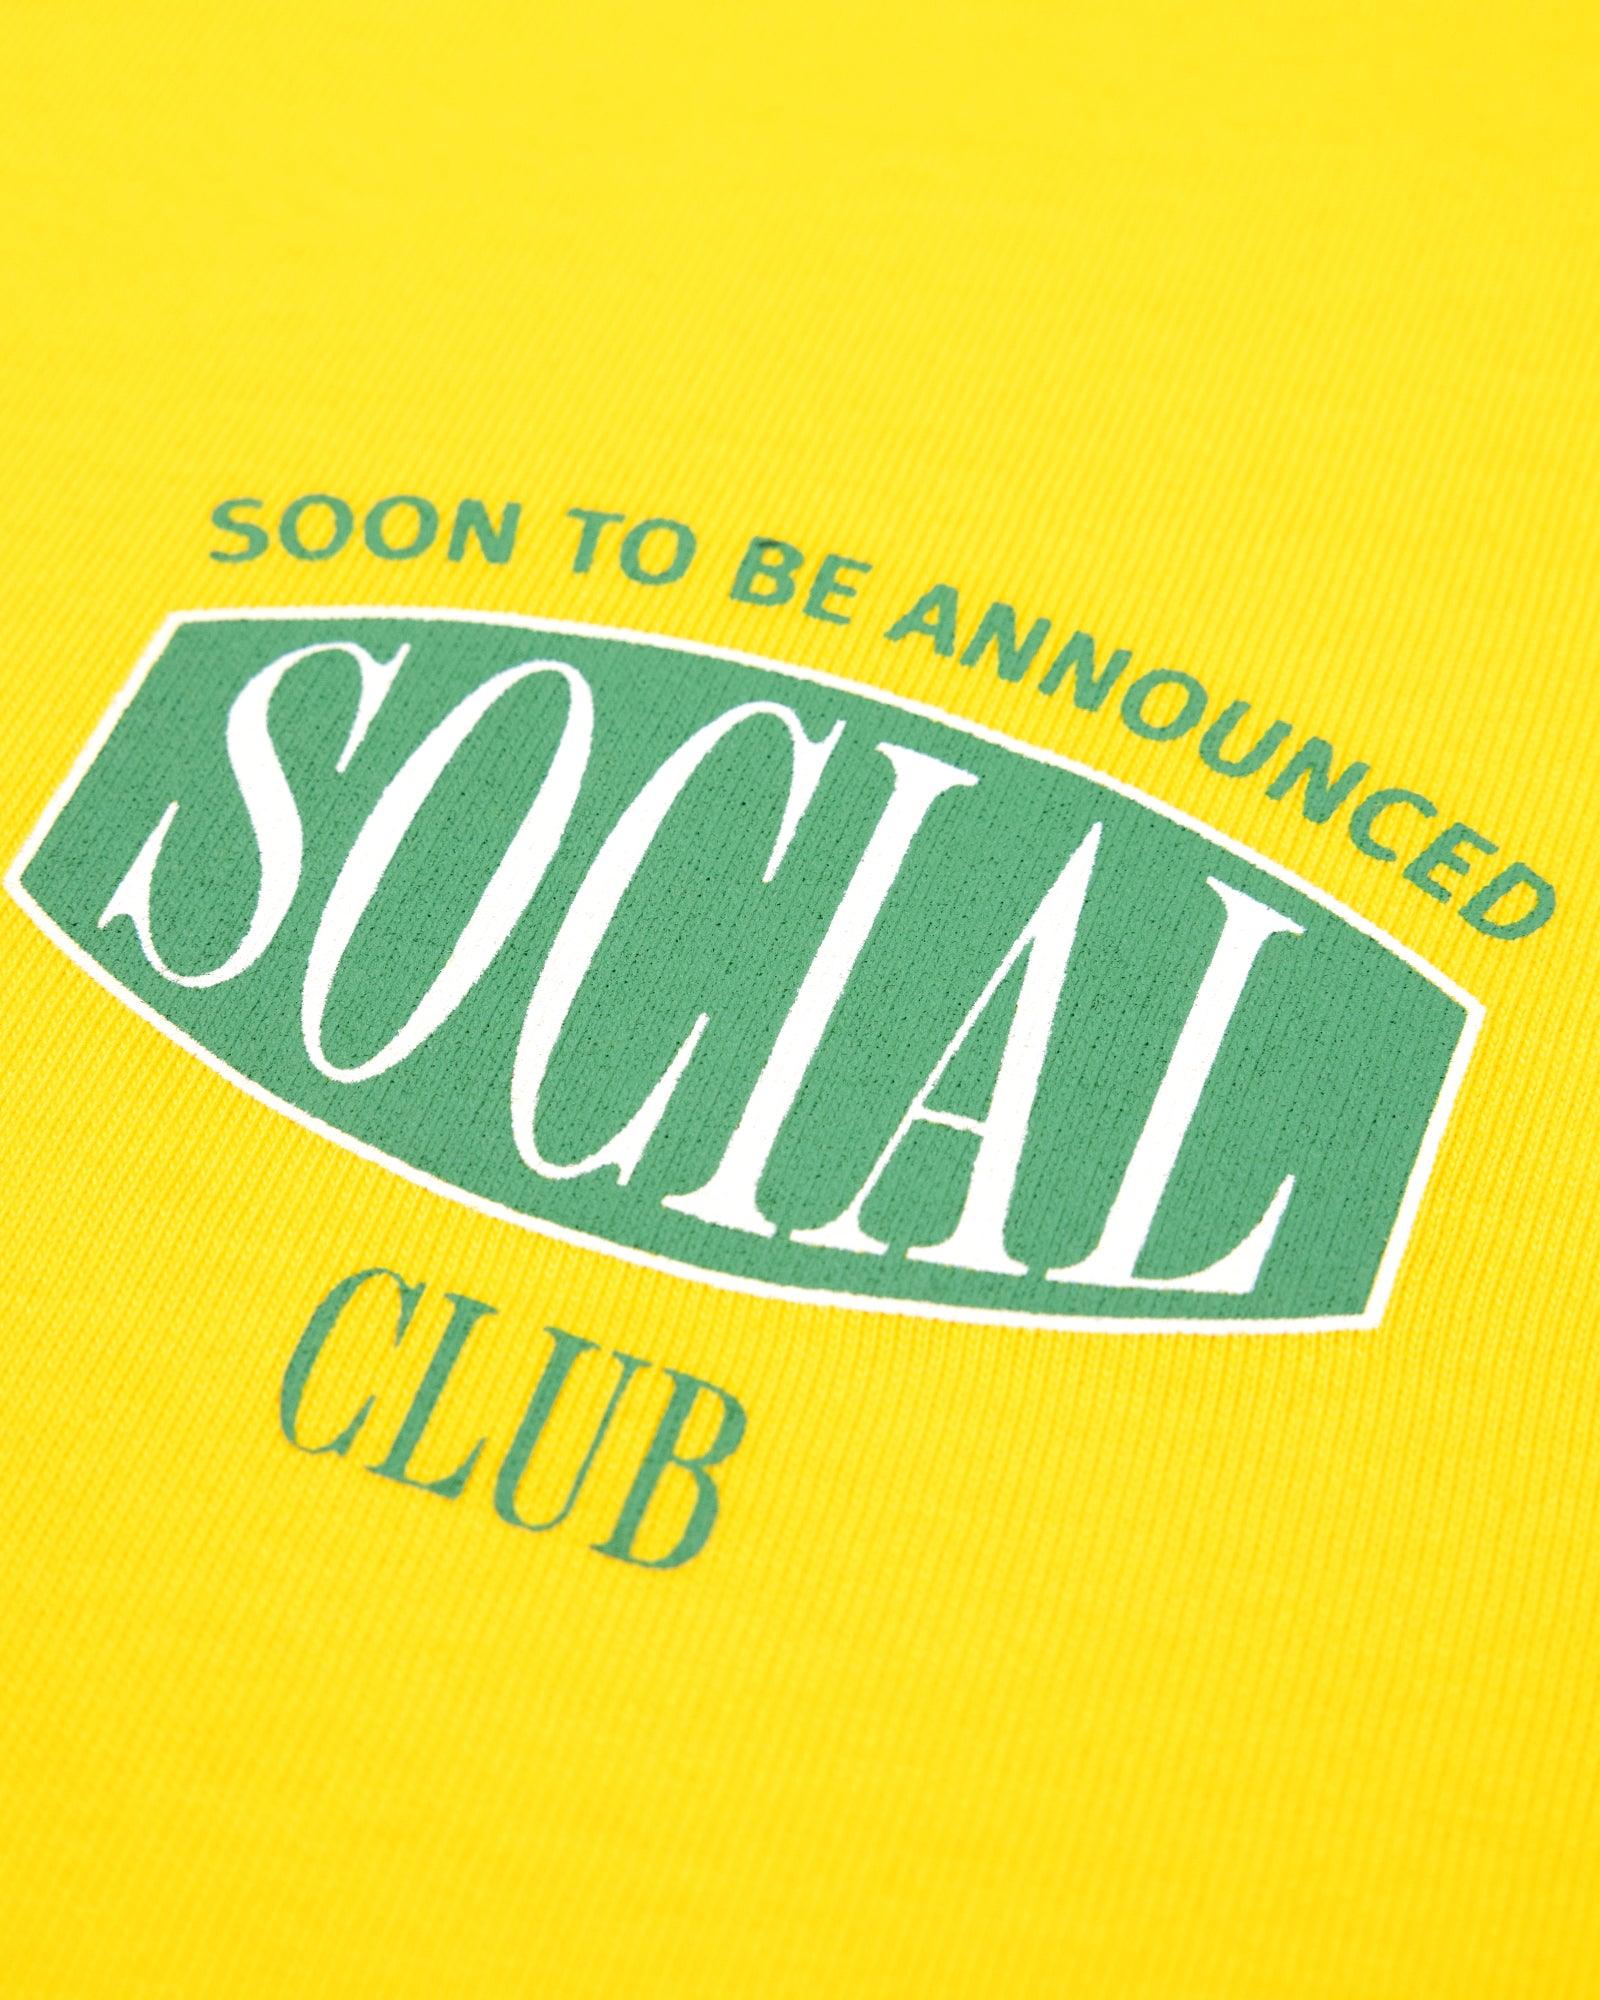 Community Crop T-Shirt - SOON TO BE ANNOUNCED